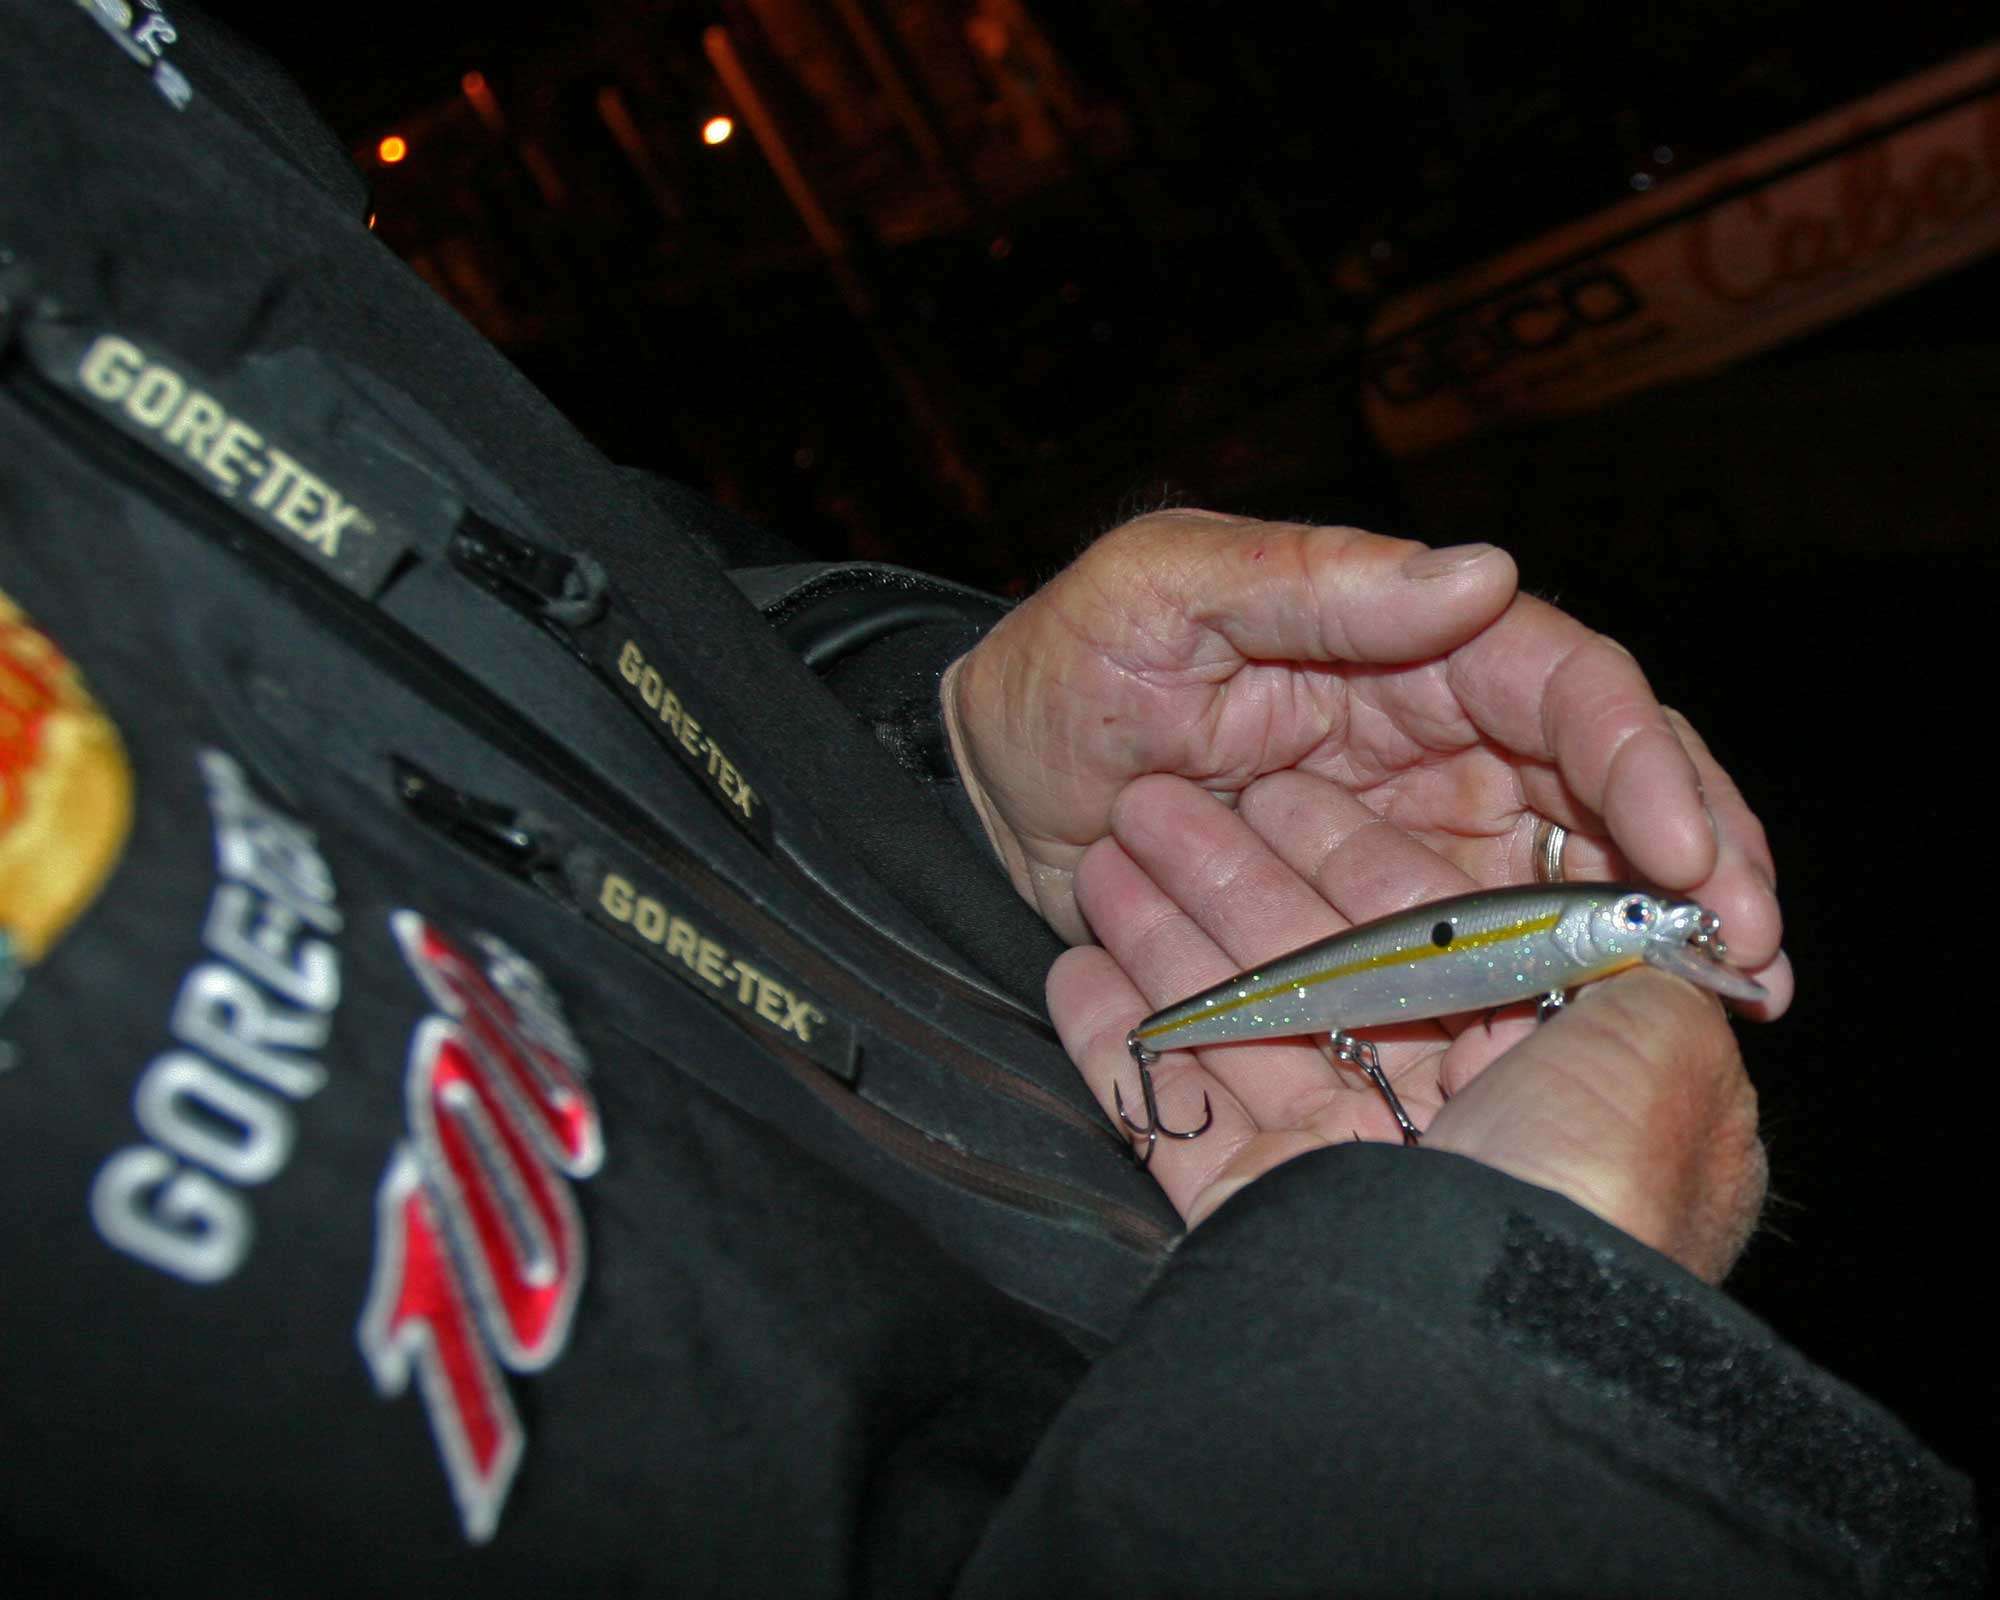 Kevin VanDam kept his jerkbait hidden as he found success with his custom Strike King Signature Series (3-hook version in Crystal Shad) jerkbait, using a fast cadence.